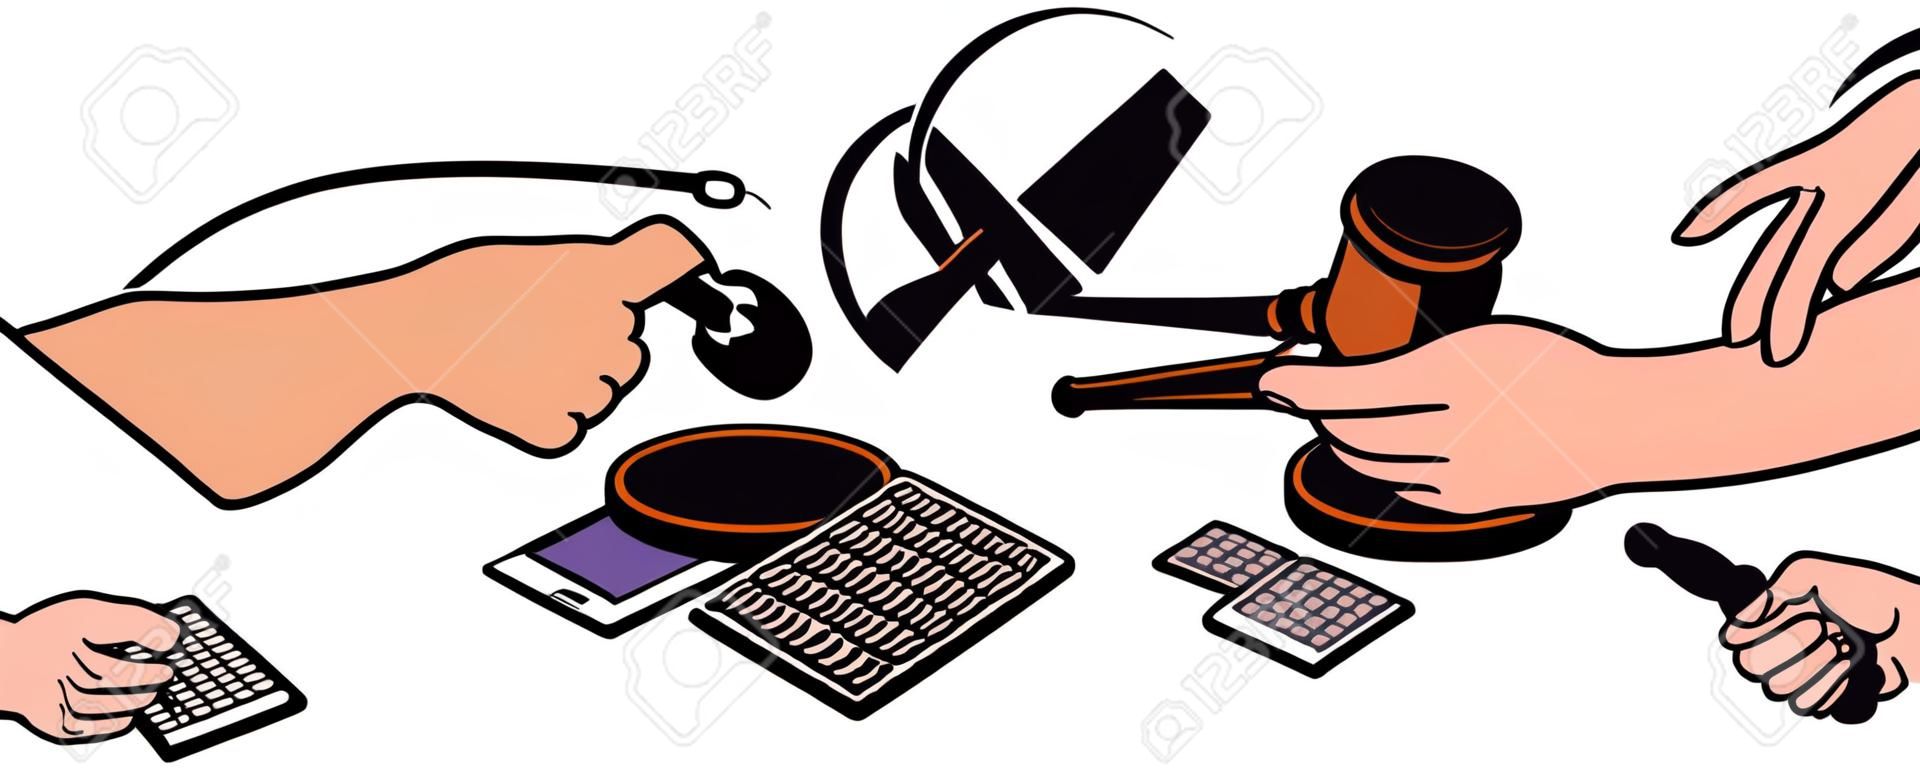 illustration showing two hands in handshake closing a deal at auction with gavel hammer going down and different goods and services like dental, repair, books, laptop computer, recycling services isolated on white background.